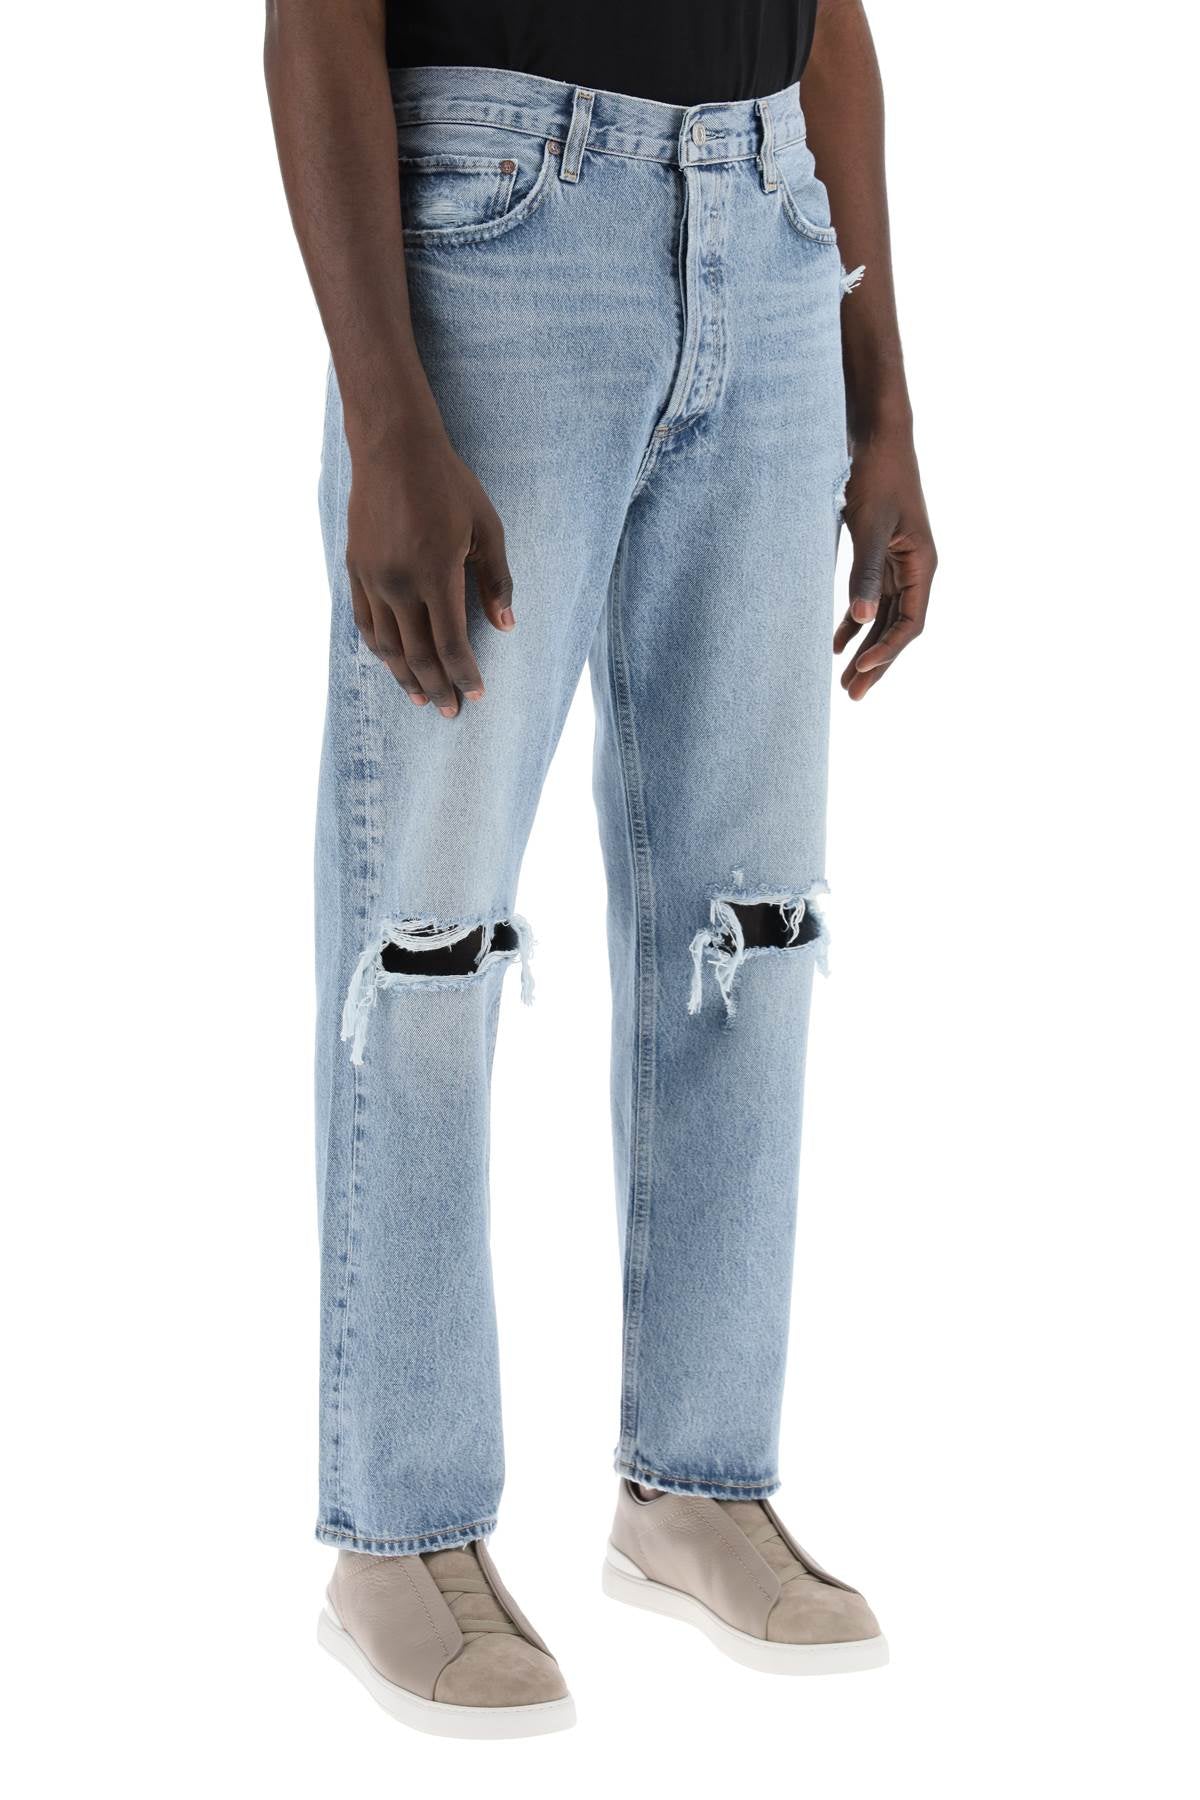 Agolde 90's destroyed jeans with distressed details-1